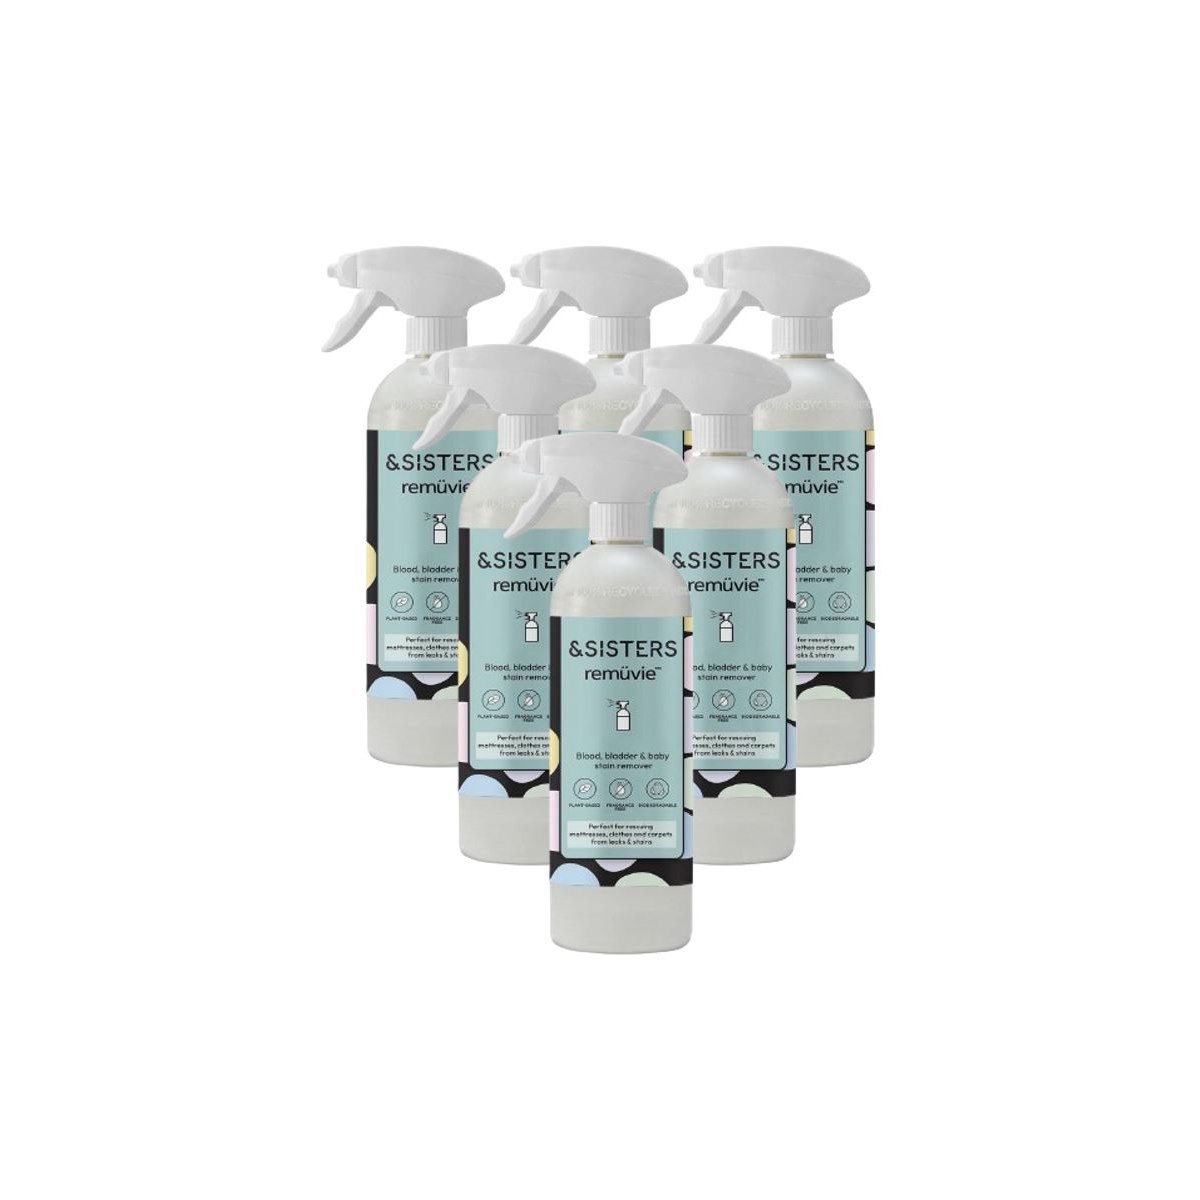 Case of 6 x Sister by Moon Cup Remuvie Fabric Stain Remover 350ml